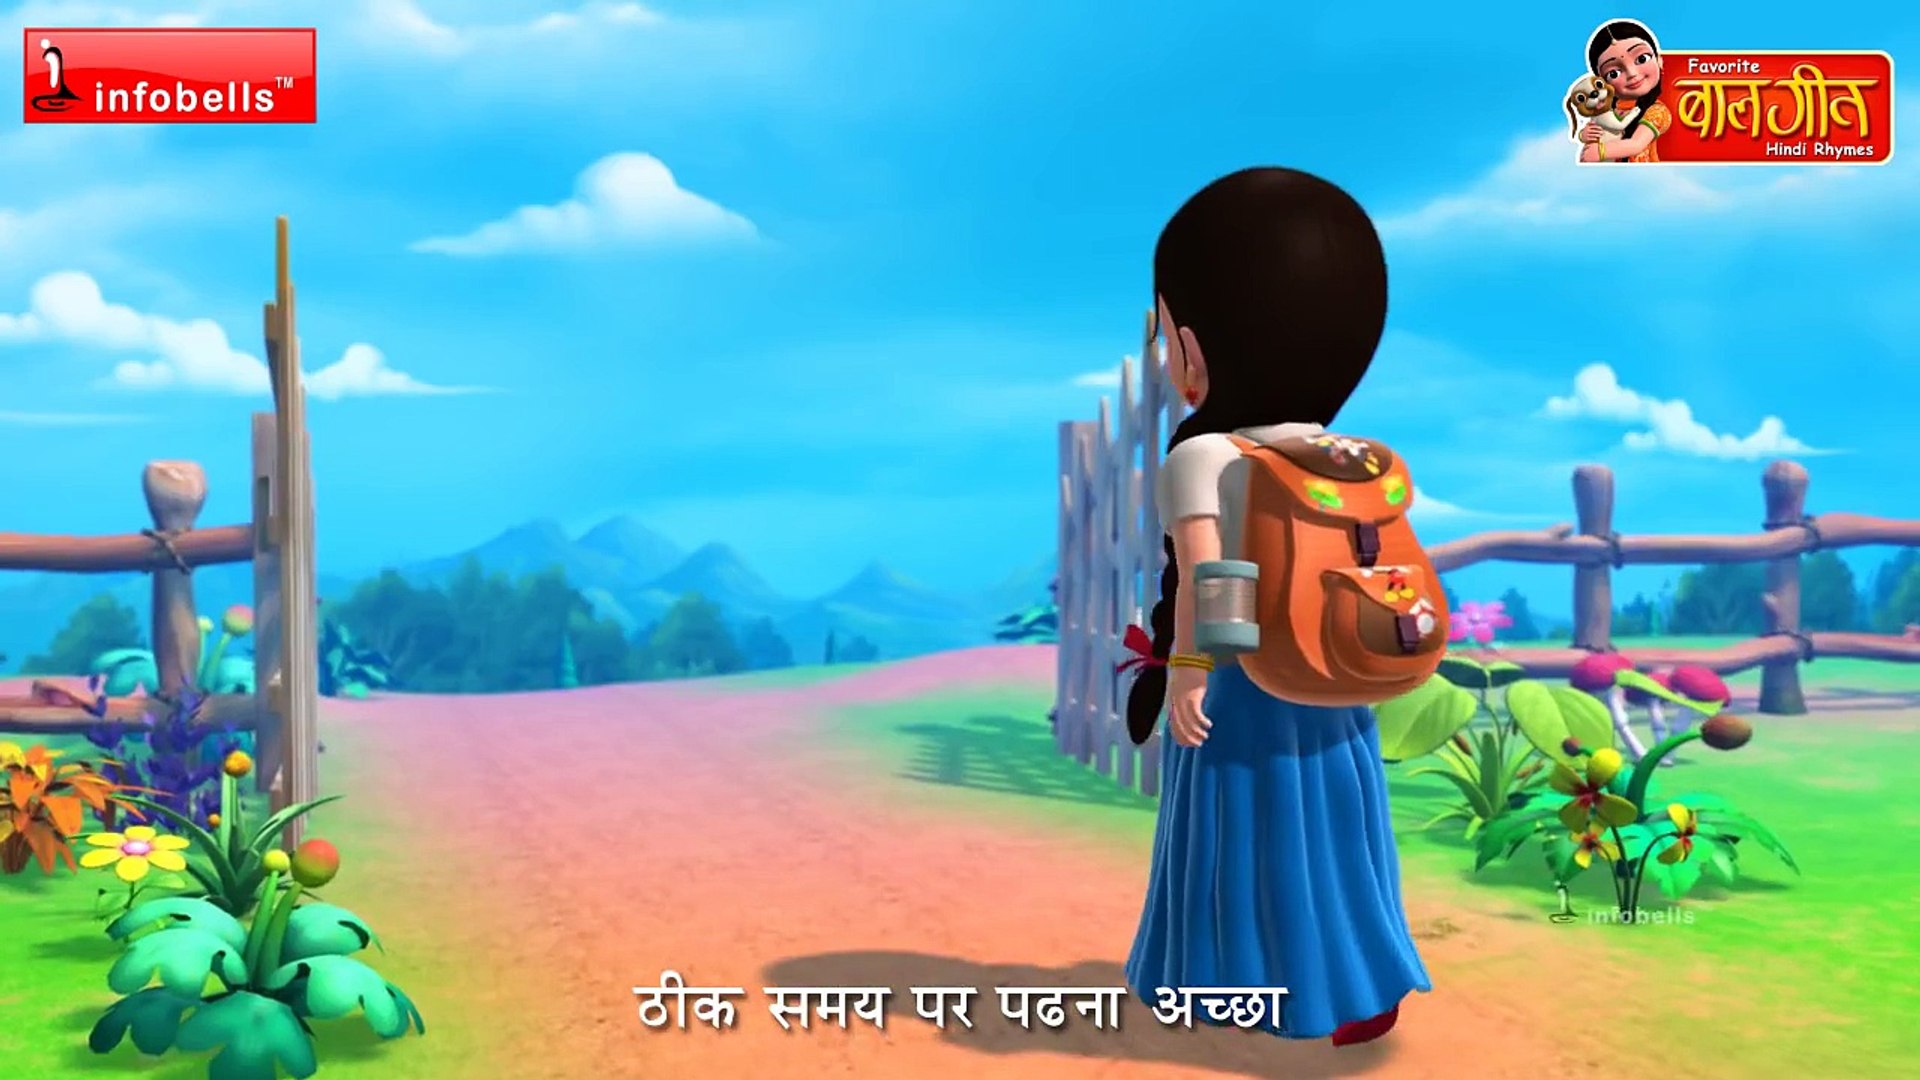 Roz Savere (Good Habits) Hindi Rhymes for Children - Dailymotion Video